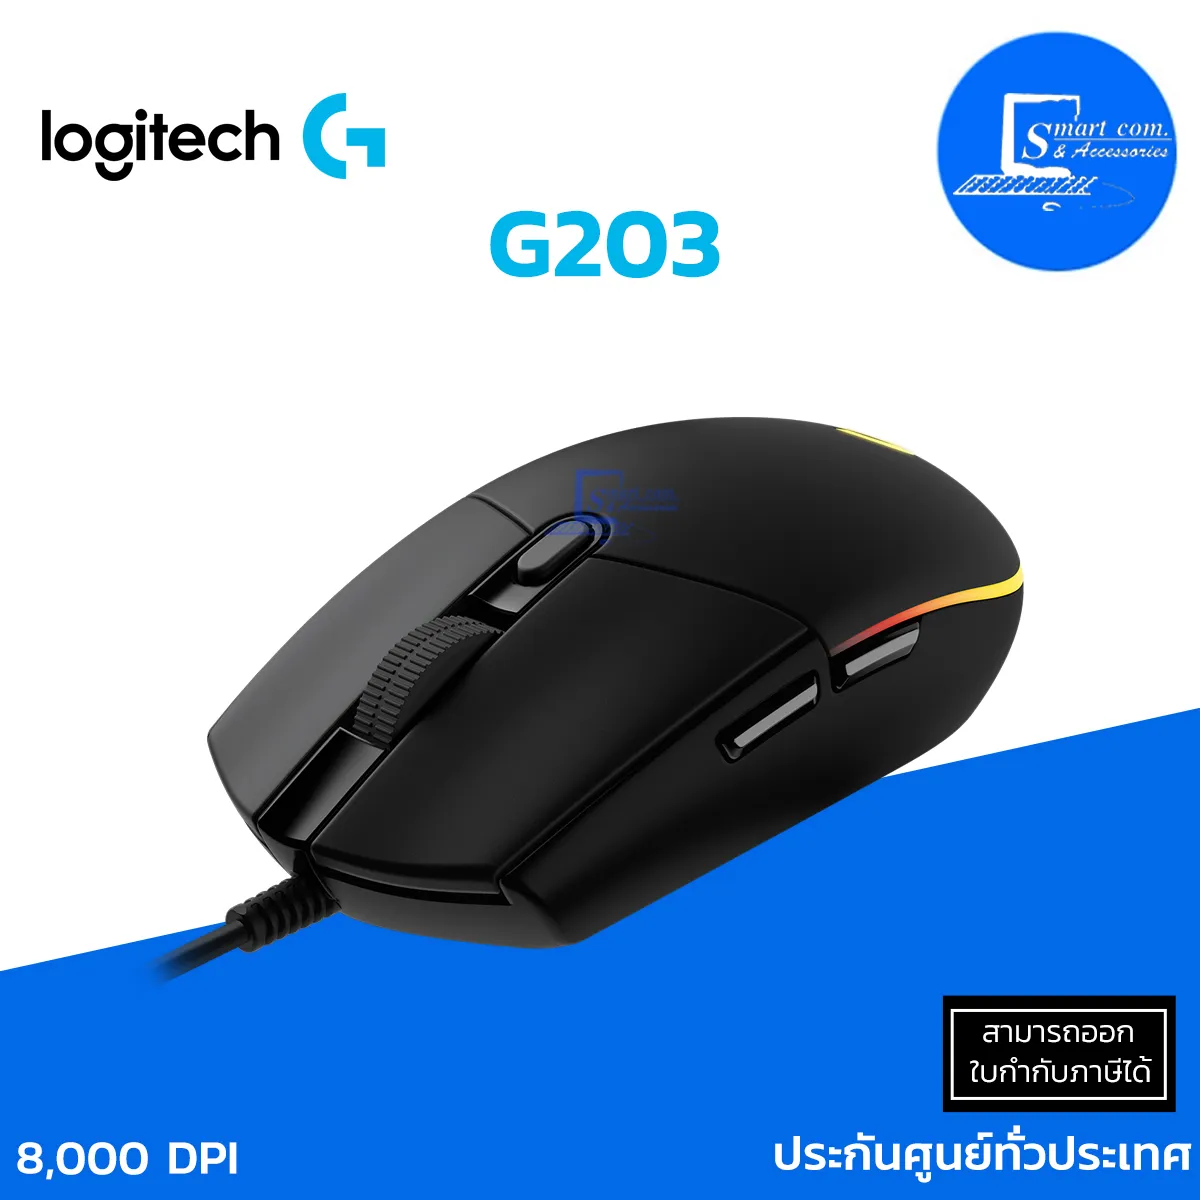 Mouse LIGHTSYNC Gaming Wired G203 Logitech